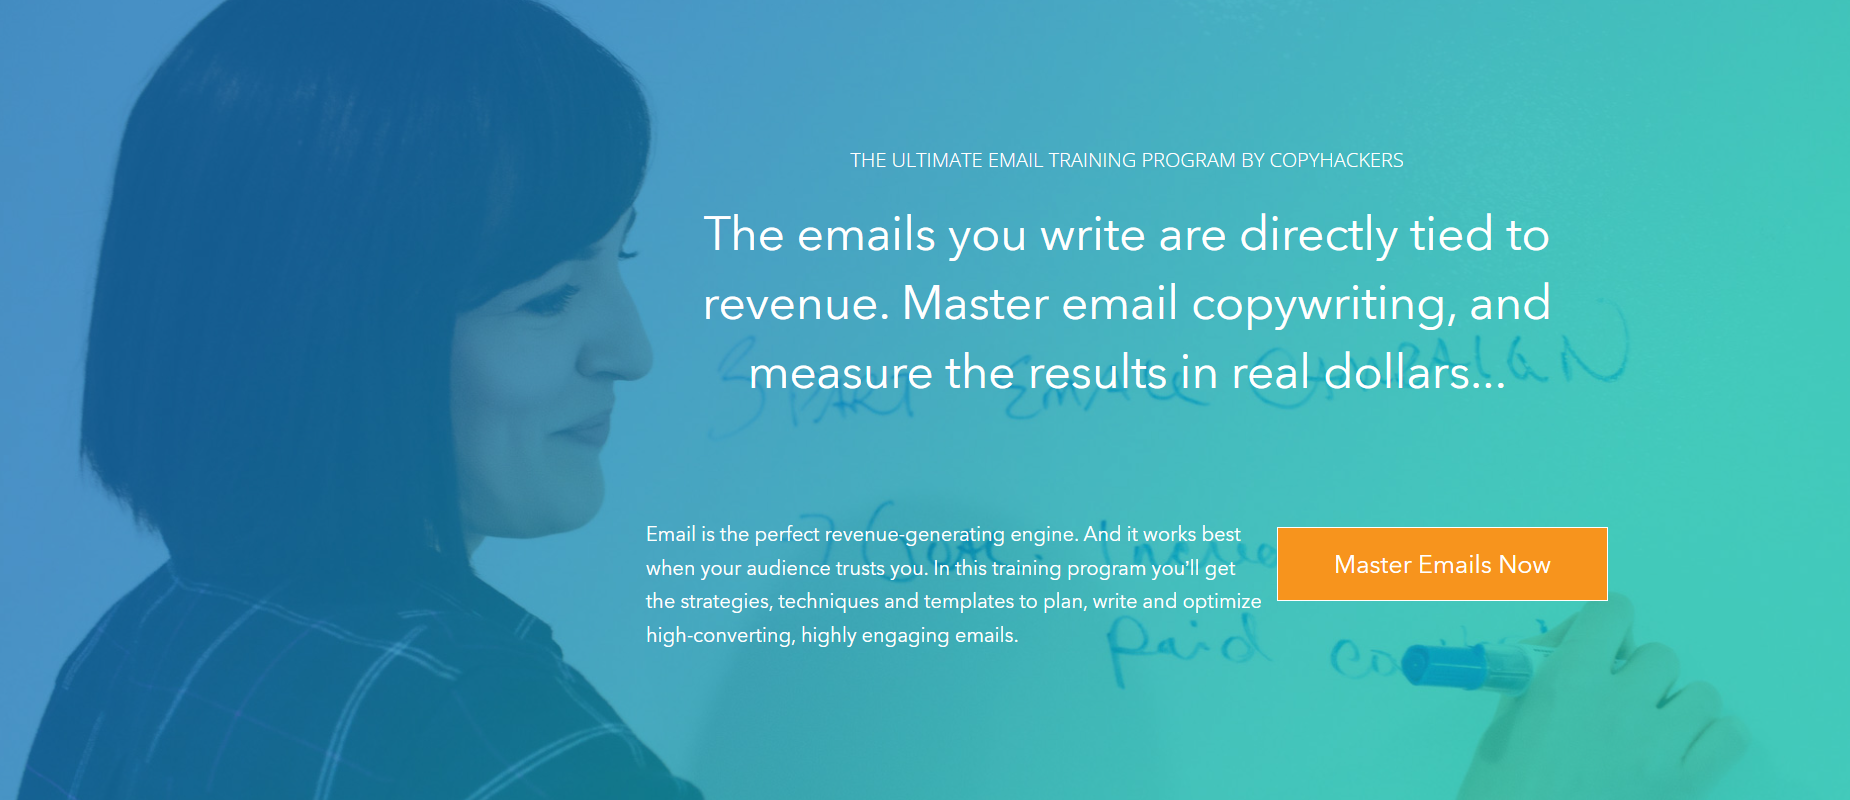 0x Emails email marketing course by CopyHackers